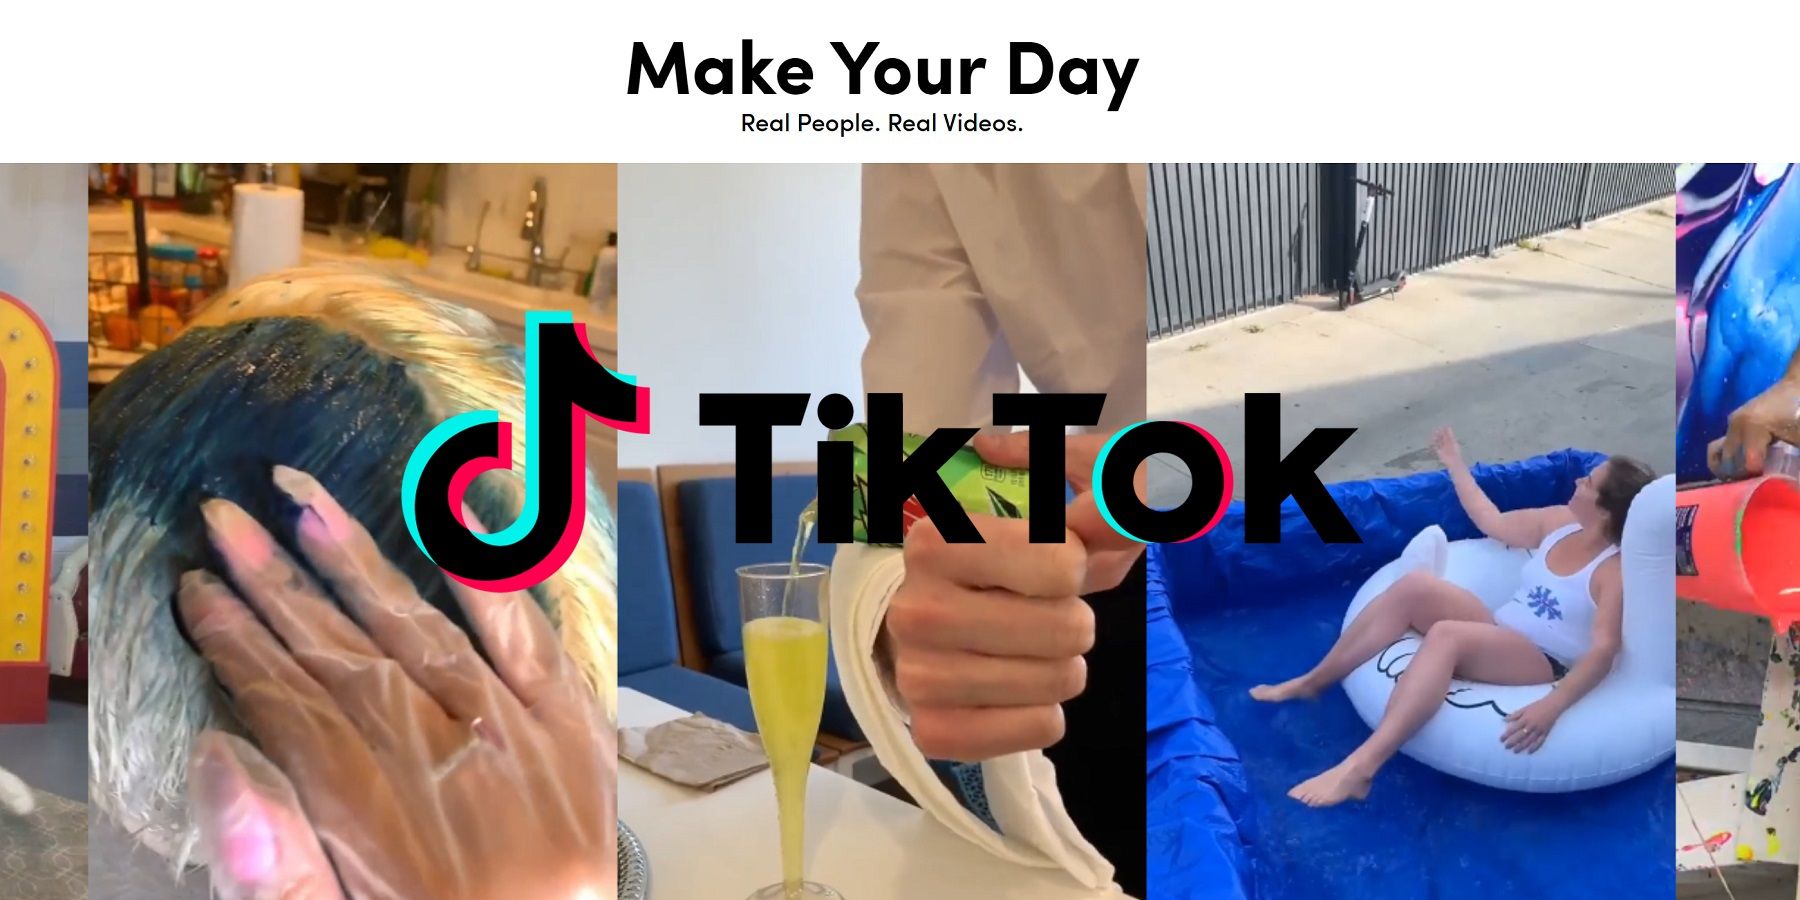 YouTube Plans To Take On TikTok With Shorts: What You Need To Know